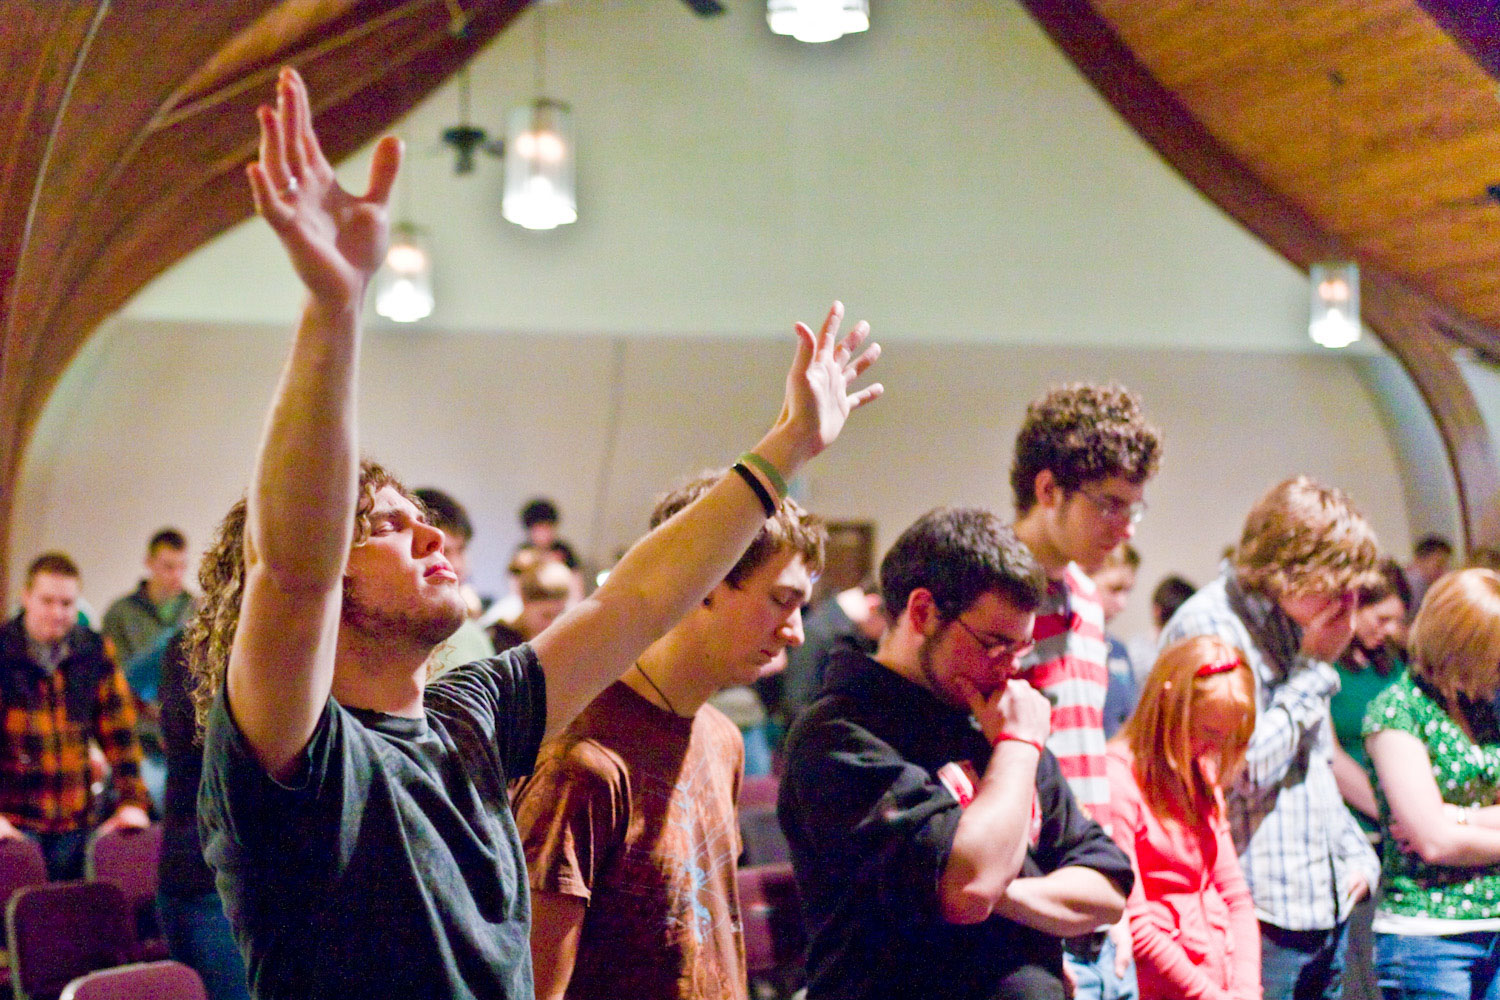 Man raises hand while others pray at the Red Sea Church in St. Johns Oregon